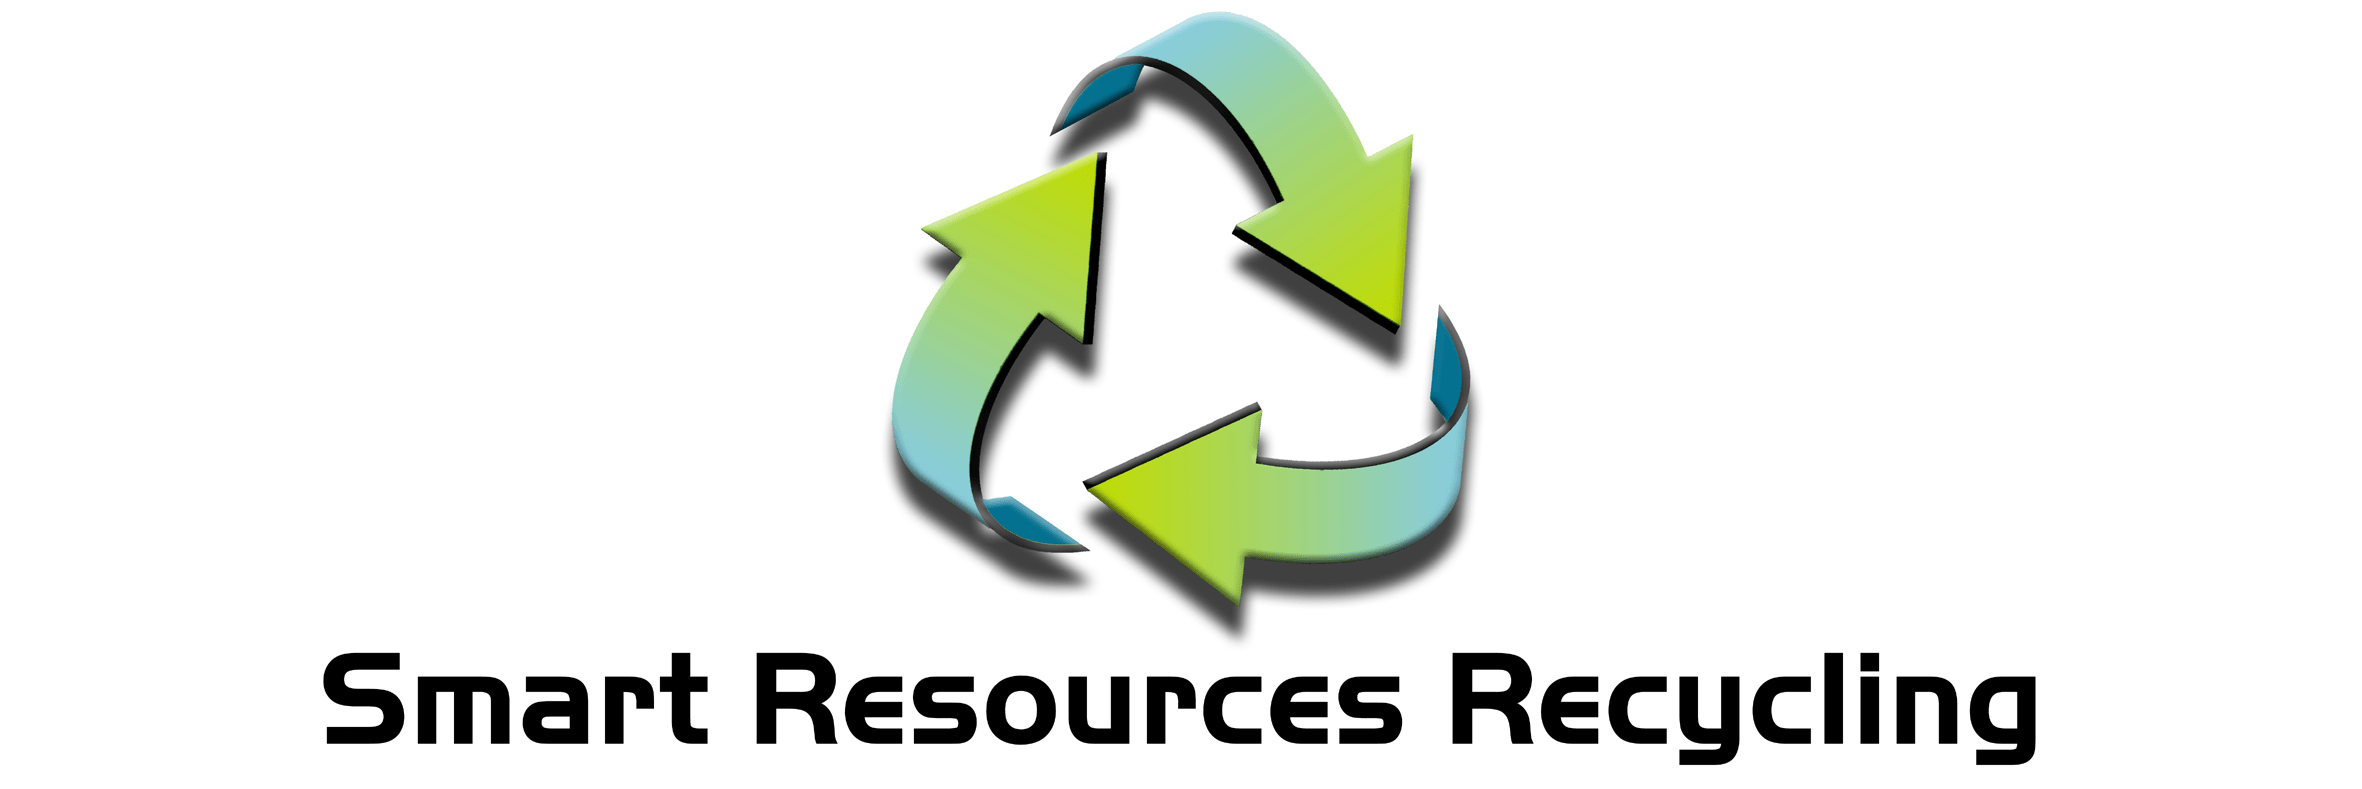 Smart Resources Recycling